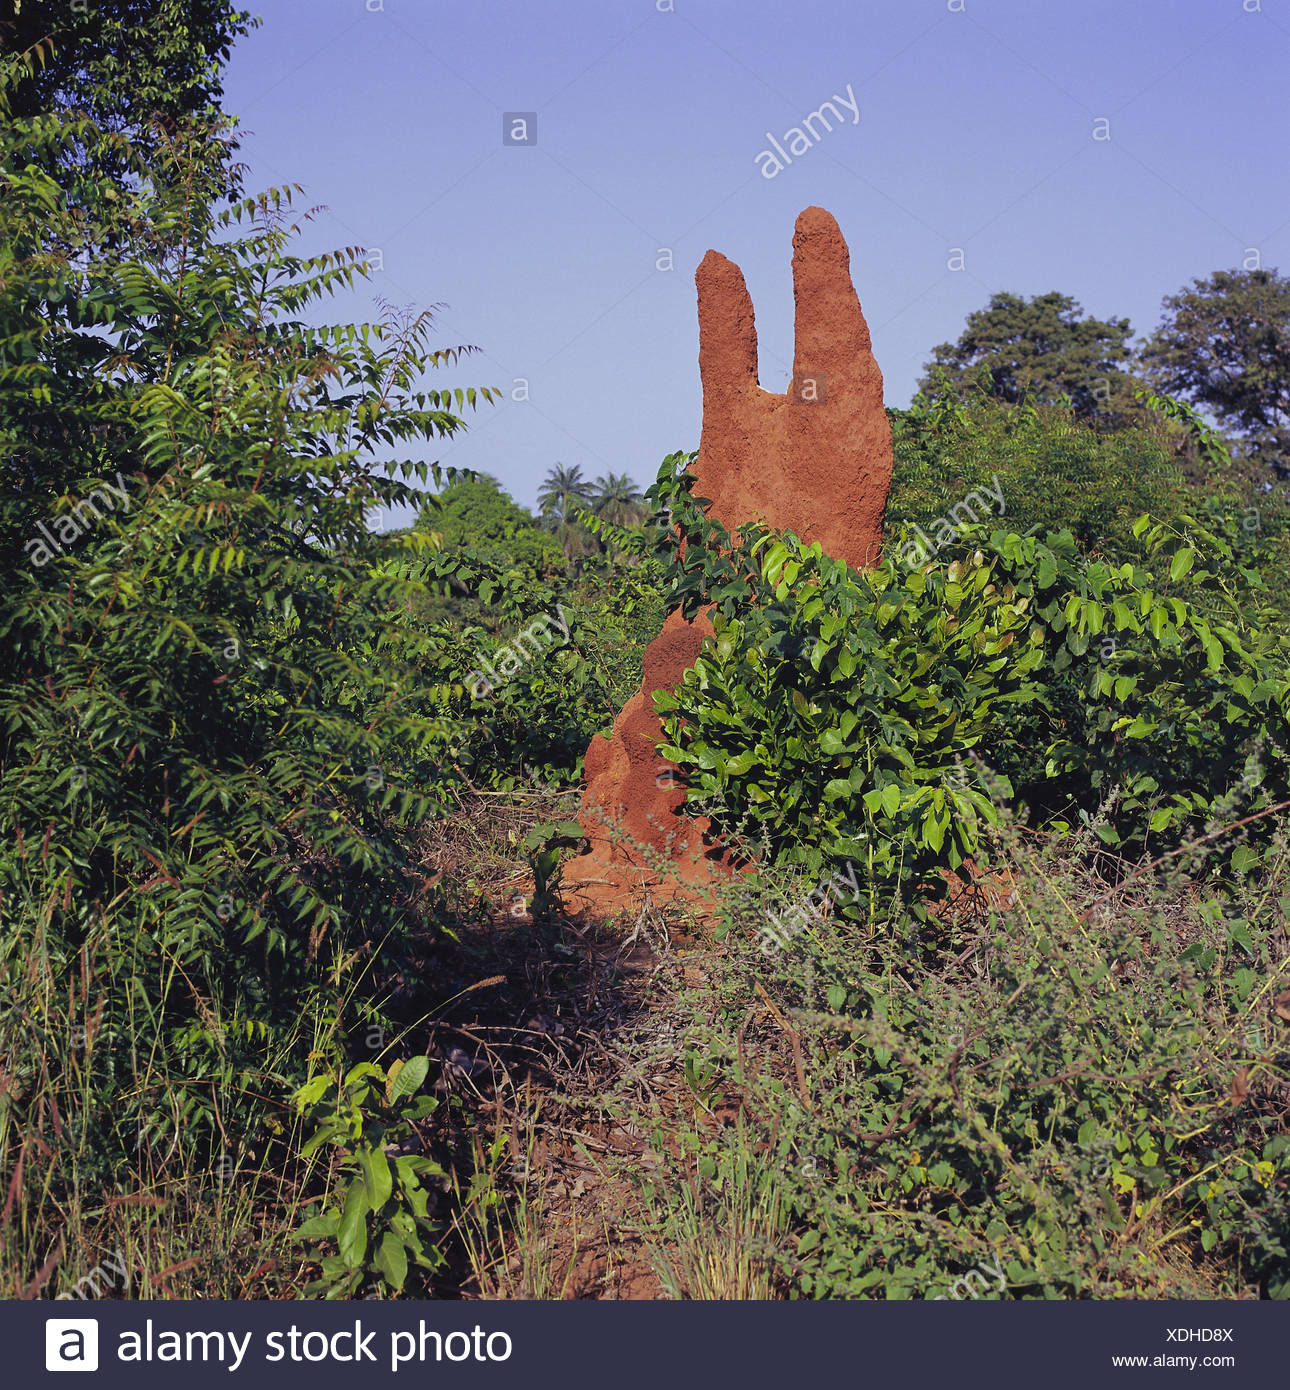 Senegal, to bass Casamance, termite hill, Africa, West, Africa, lower  Casamance, national park, forest, shrubs, termite construction, termitary,  termites, vegetation, nature Stock Photo - Alamy